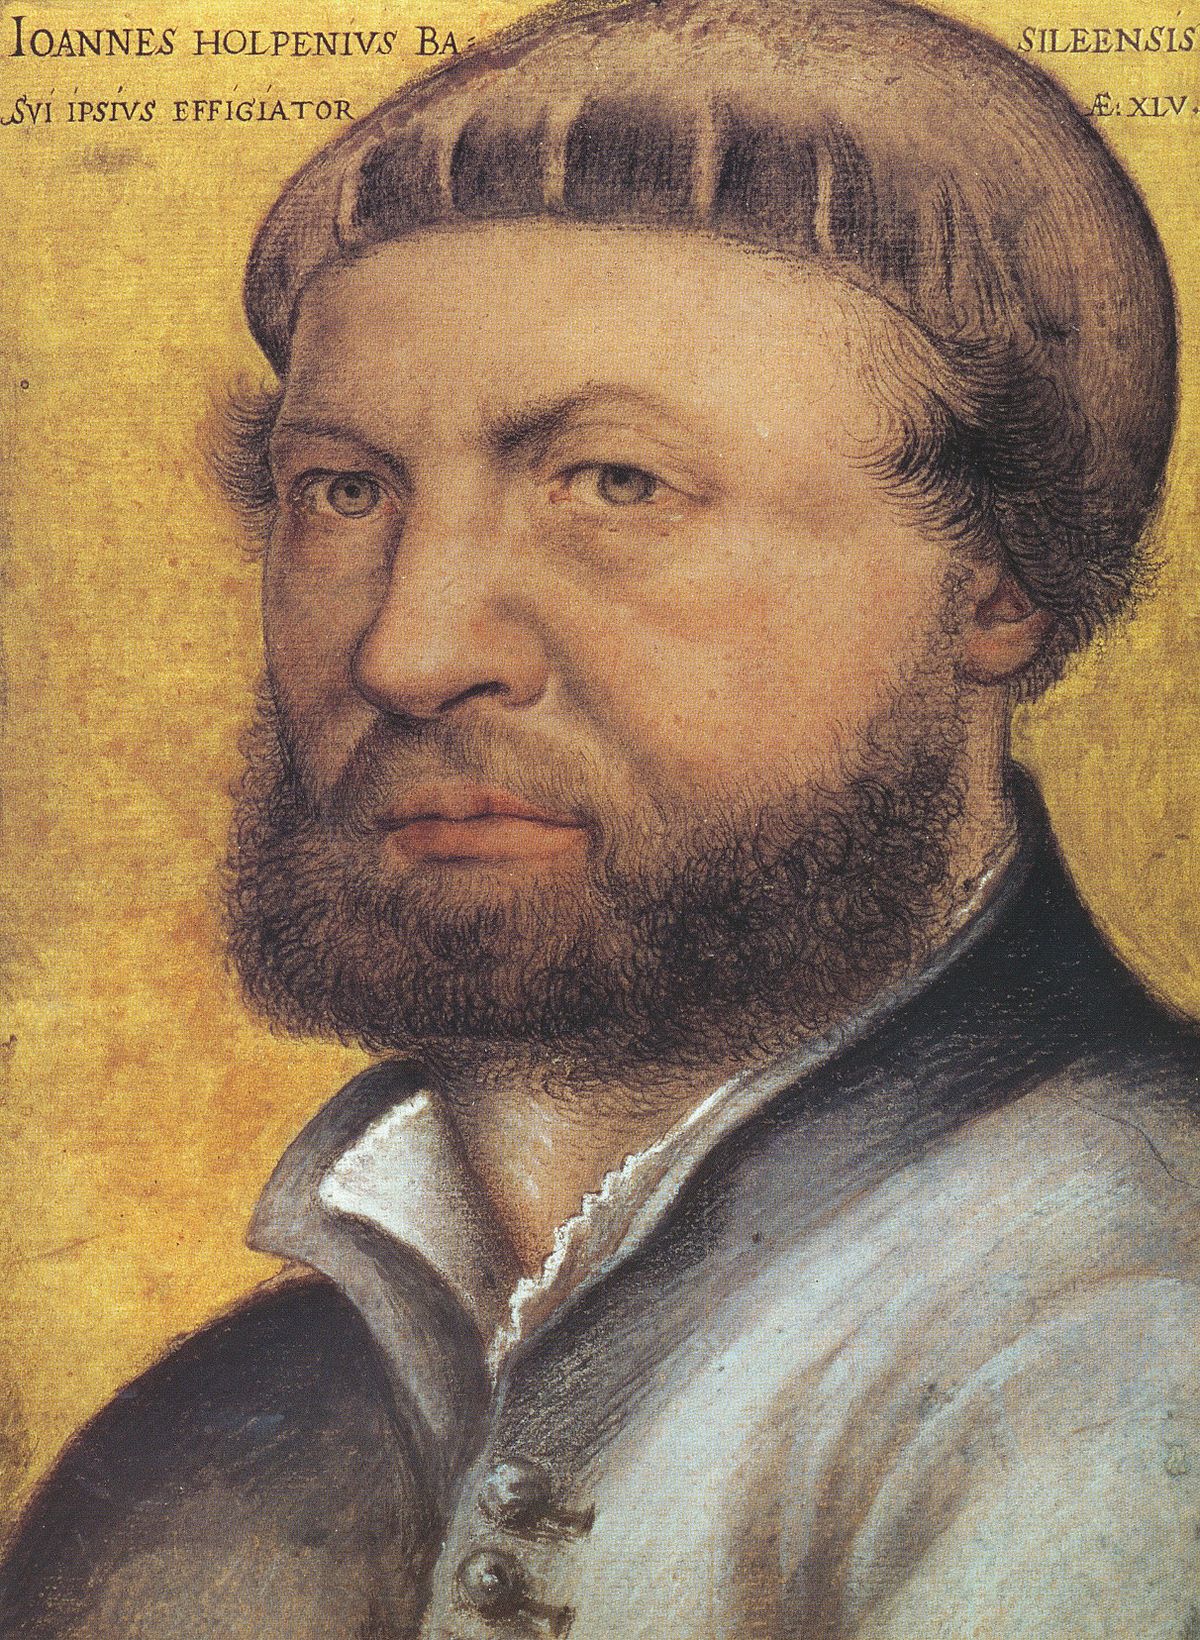 https://upload.wikimedia.org/wikipedia/commons/thumb/d/d7/Hans_Holbein_the_Younger%2C_self-portrait.jpg/1200px-Hans_Holbein_the_Younger%2C_self-portrait.jpg